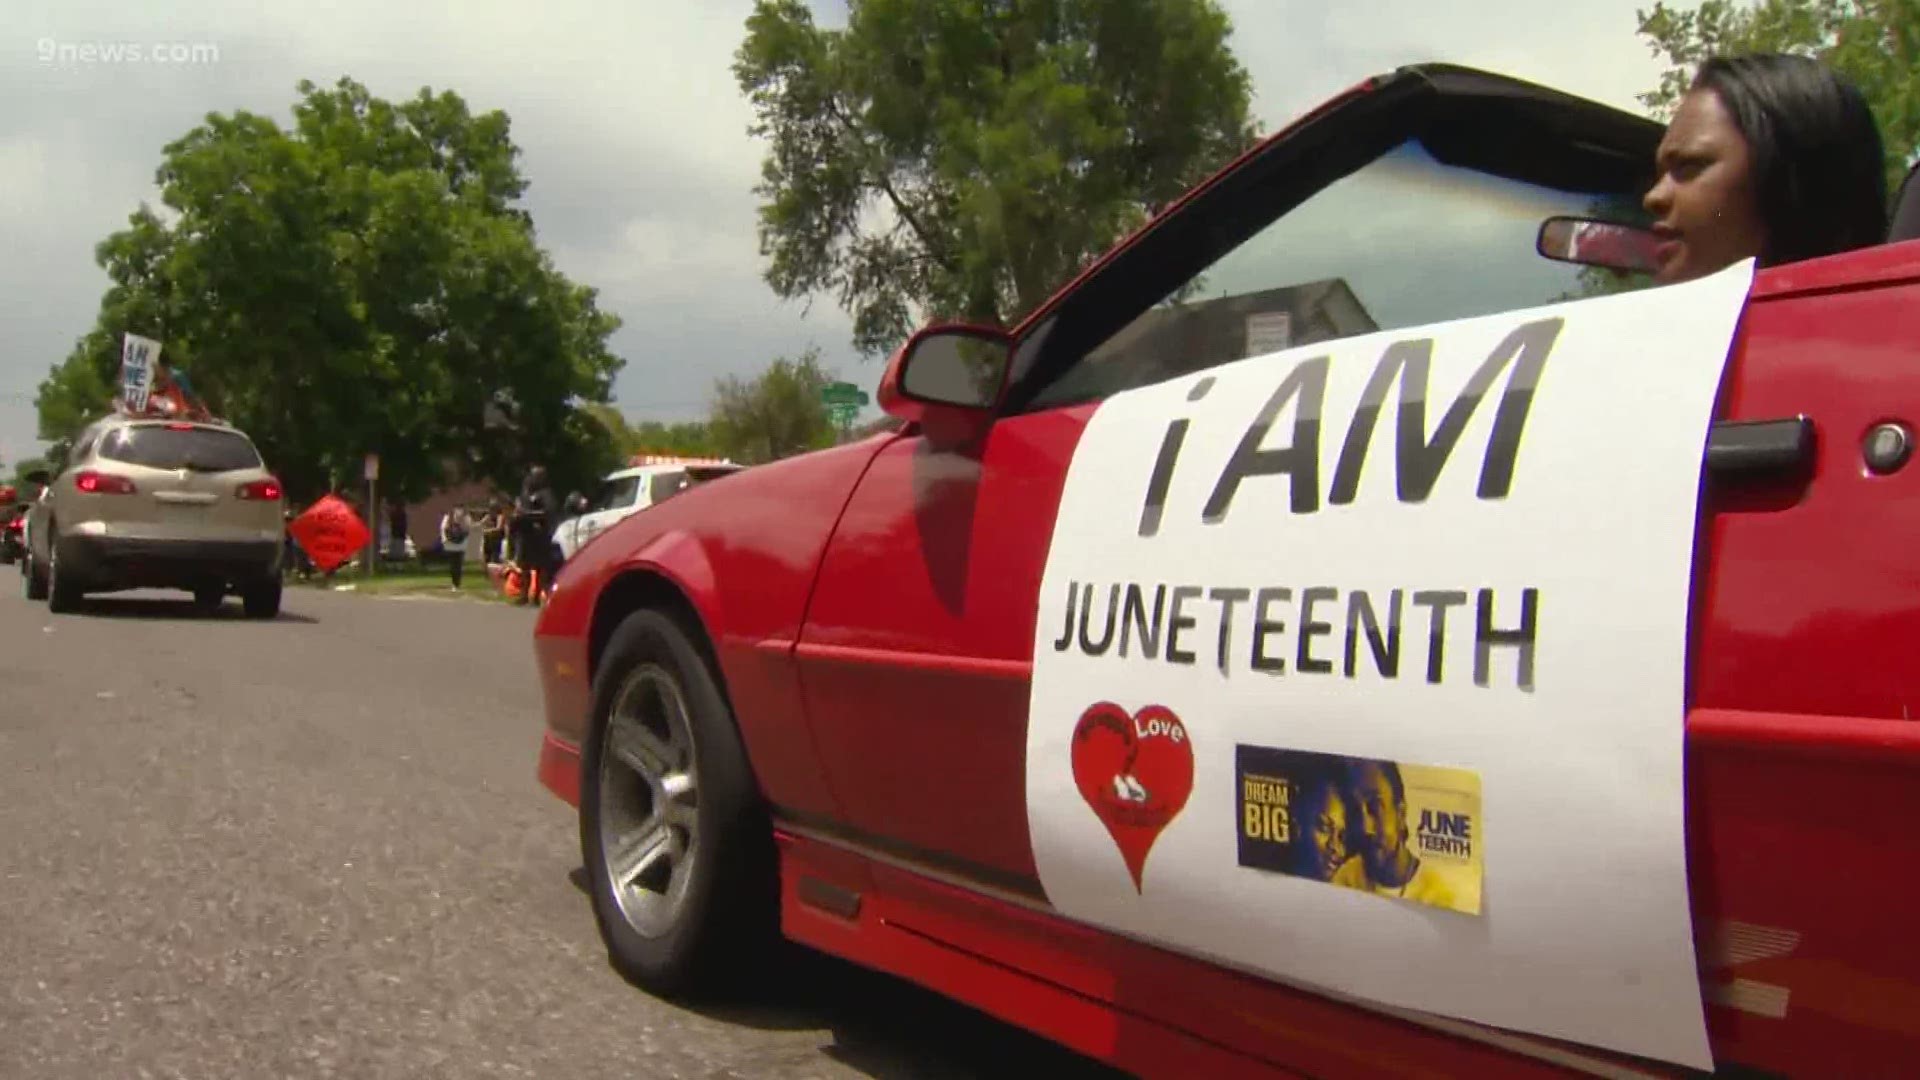 Ahead of Juneteenth, Coloradans celebrated the holiday with a parade.